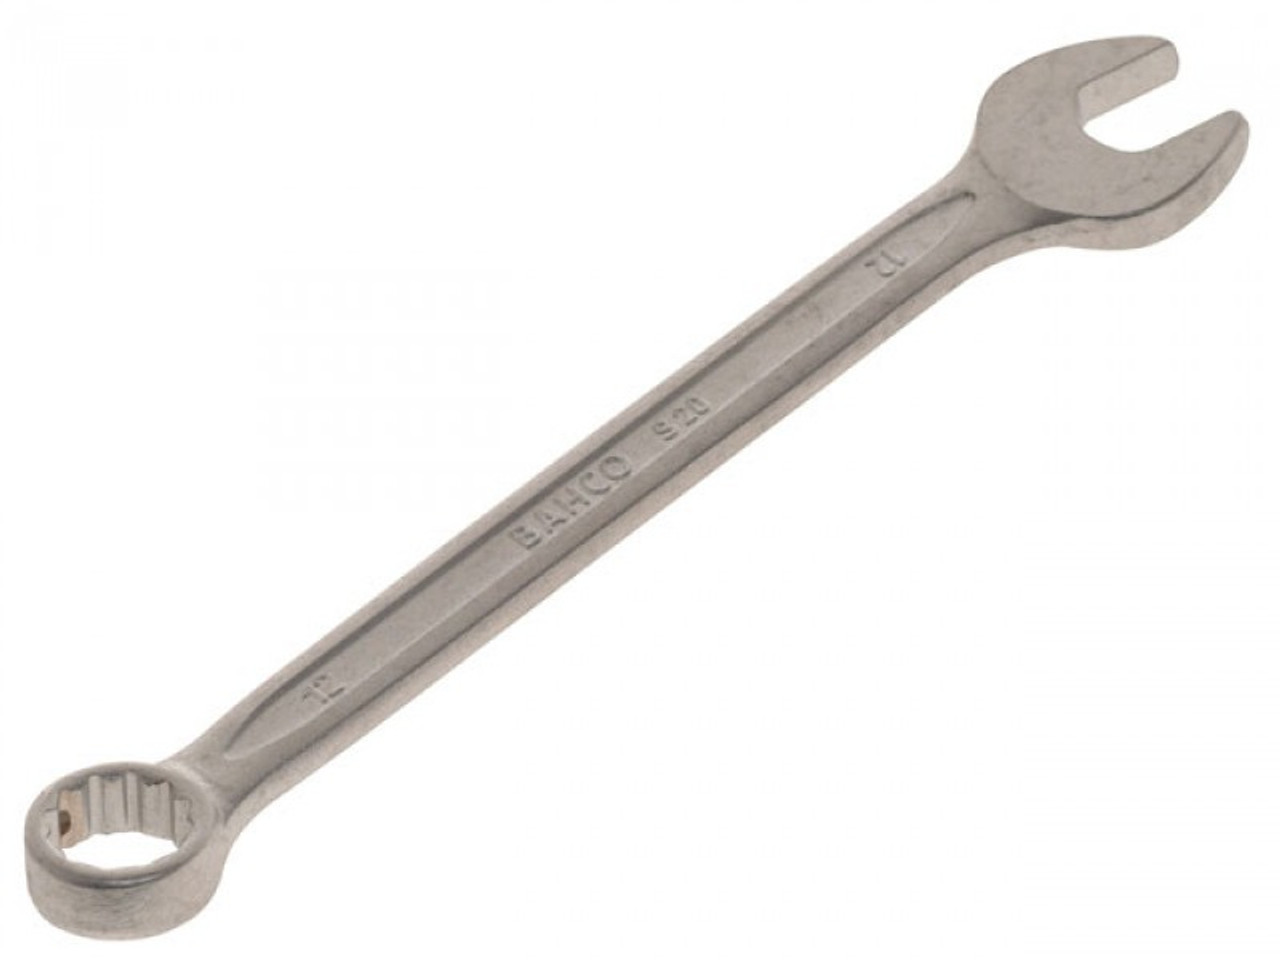 IMPA 616170 WRENCH OPEN & 12-POINT BOX INCH 3/8" AF TRANSTIME